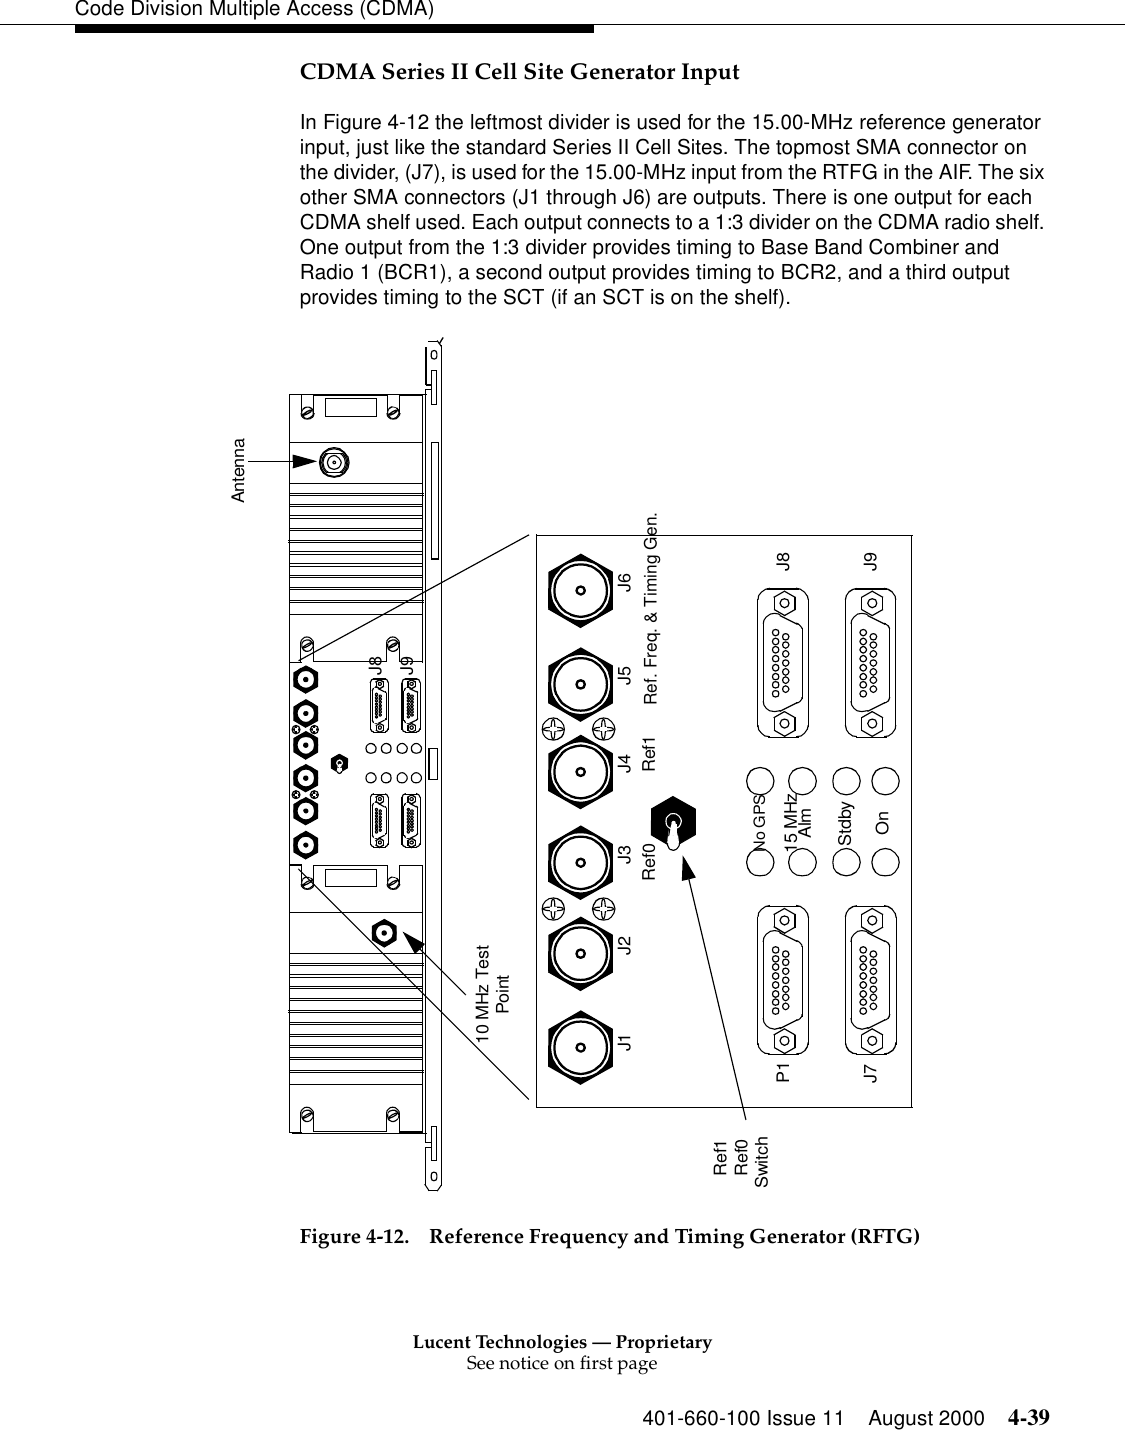 Lucent Technologies — ProprietarySee notice on first page401-660-100 Issue 11 August 2000 4-39Code Division Multiple Access (CDMA)CDMA Series II Cell Site Generator Input In Figure 4-12 the leftmost divider is used for the 15.00-MHz reference generator input, just like the standard Series II Cell Sites. The topmost SMA connector on the divider, (J7), is used for the 15.00-MHz input from the RTFG in the AIF. The six other SMA connectors (J1 through J6) are outputs. There is one output for each CDMA shelf used. Each output connects to a 1:3 divider on the CDMA radio shelf. One output from the 1:3 divider provides timing to Base Band Combiner and Radio 1 (BCR1), a second output provides timing to BCR2, and a third output provides timing to the SCT (if an SCT is on the shelf). Figure 4-12. Reference Frequency and Timing Generator (RFTG)J8J9Antenna10 MHz TestPointRef0Ref1J1 J2 J3 J4 J5 J6Ref. Freq. &amp; Timing Gen.P1J7J8J9Ref0 Ref1No GPS15 MHzAlmStdbyOnSwitch                       